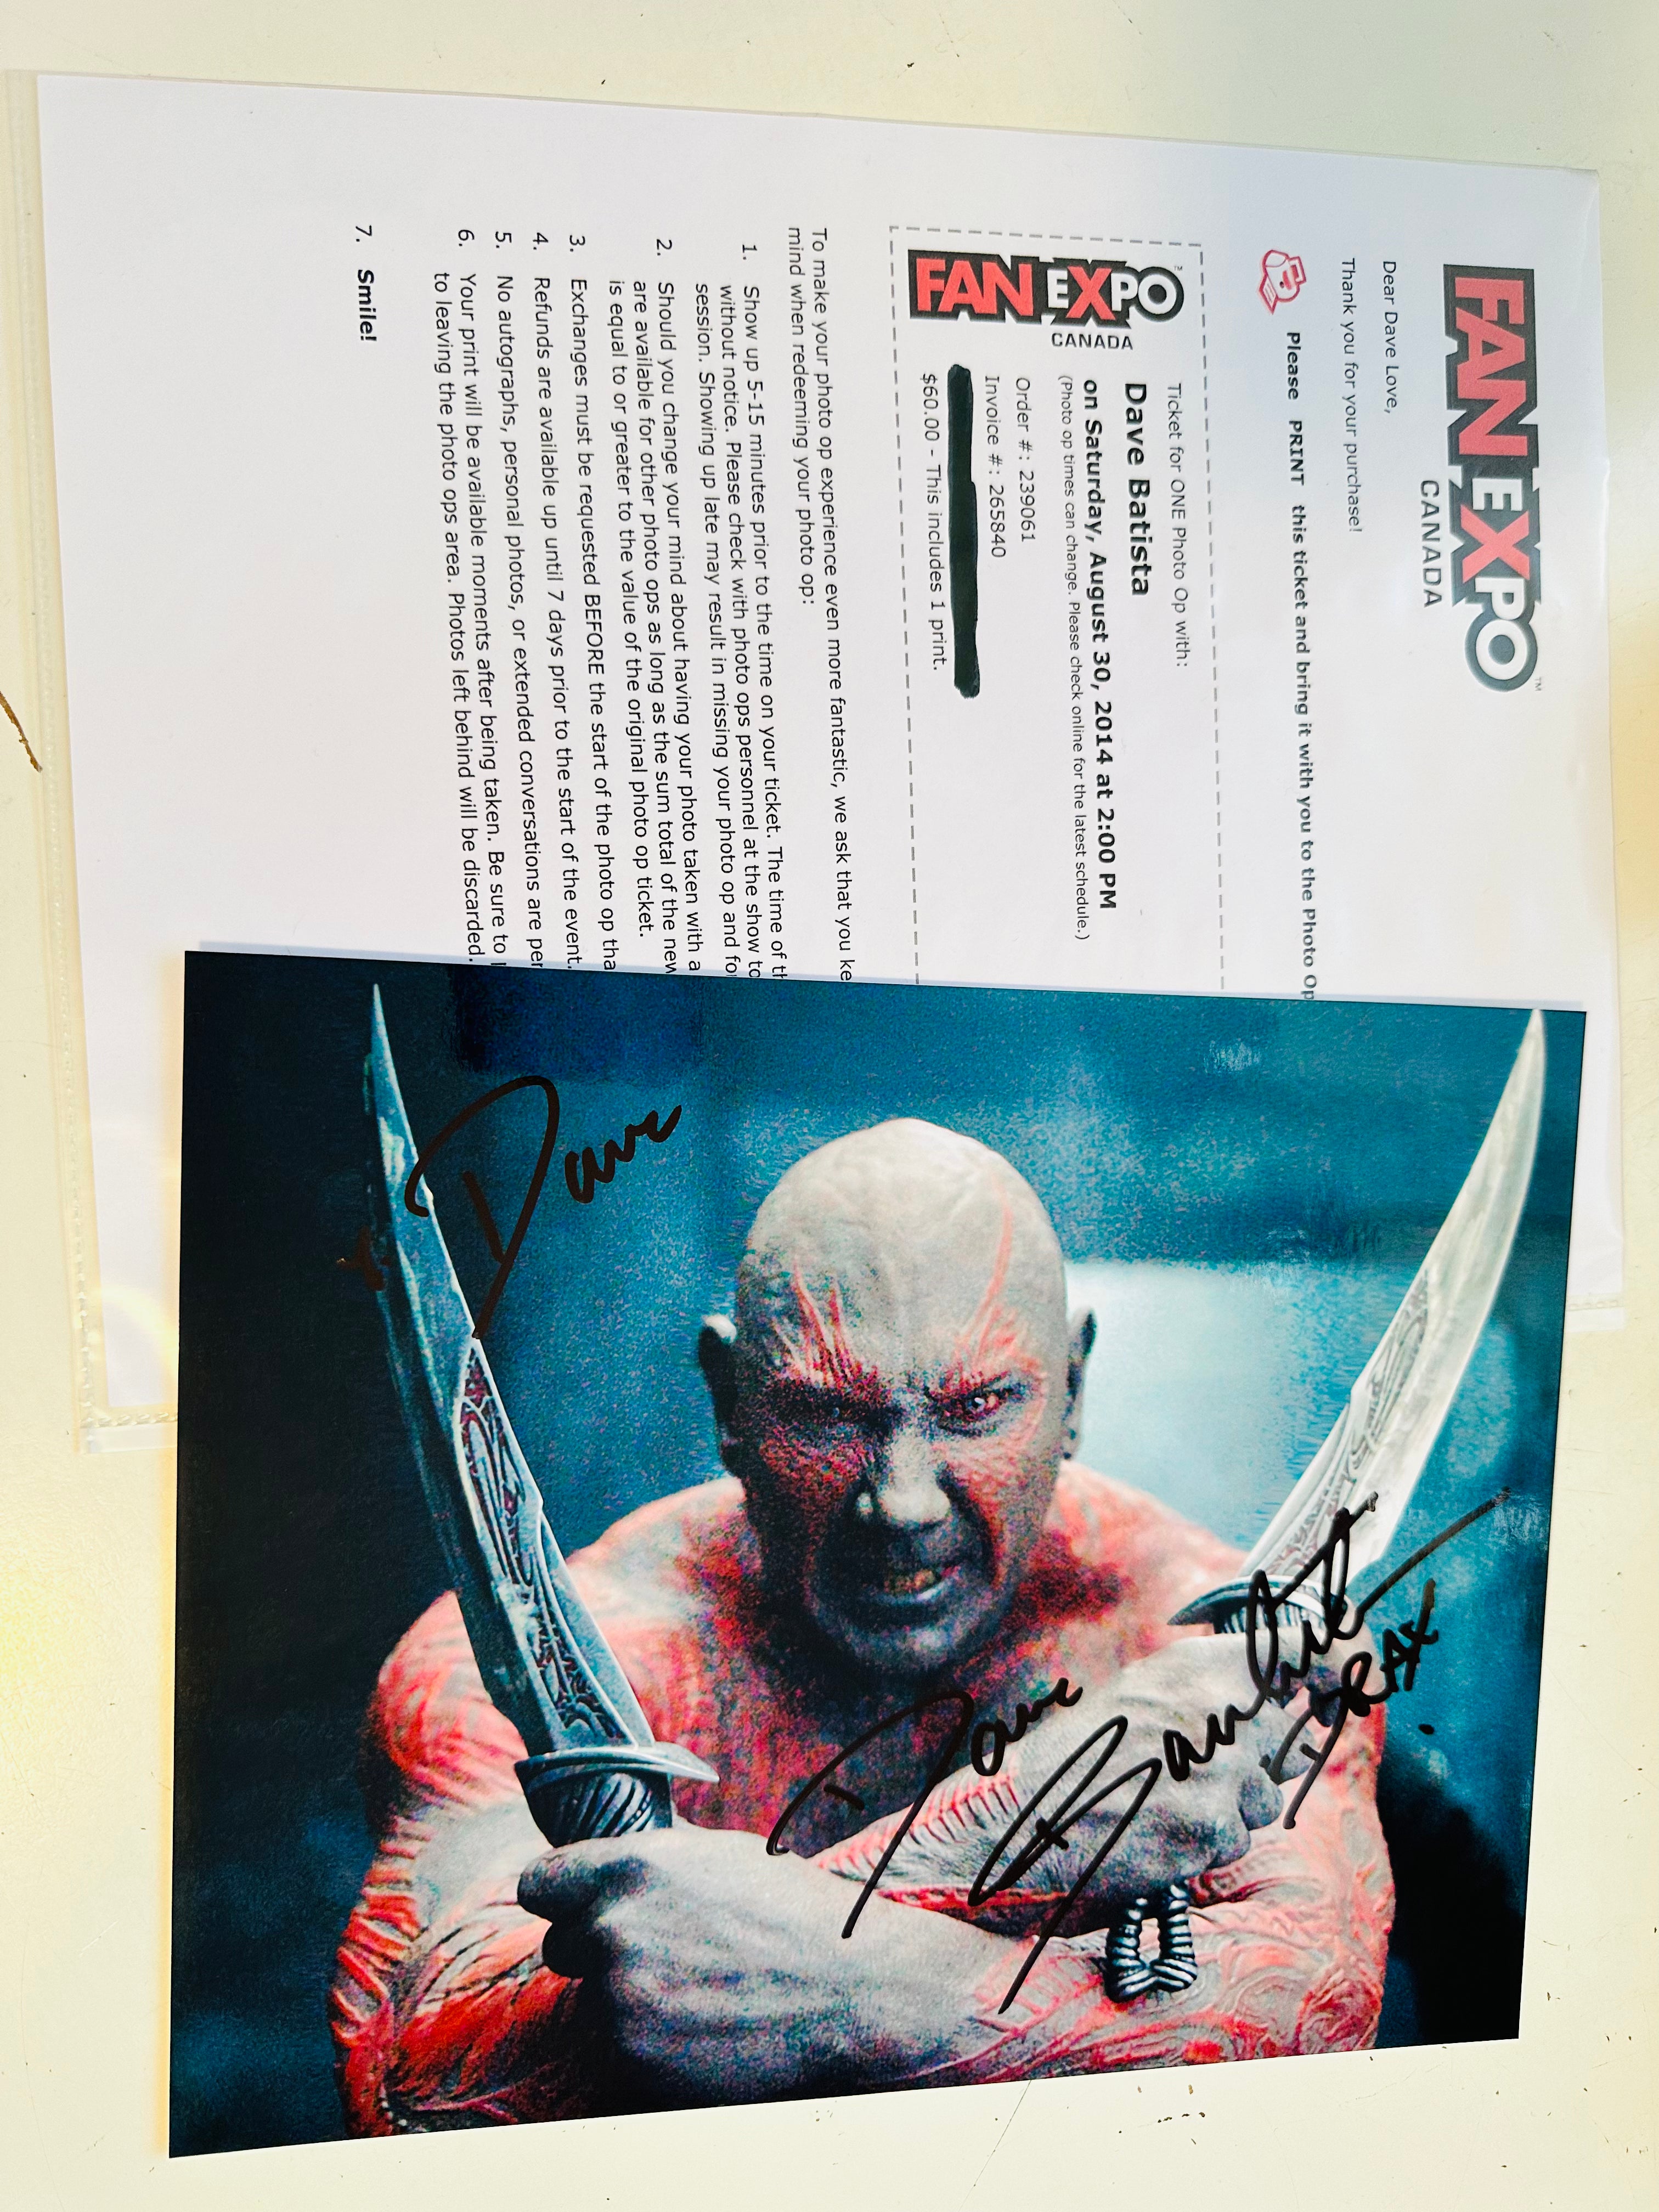 Dave Bautista autographed 8x10 photo signed in August, 2014